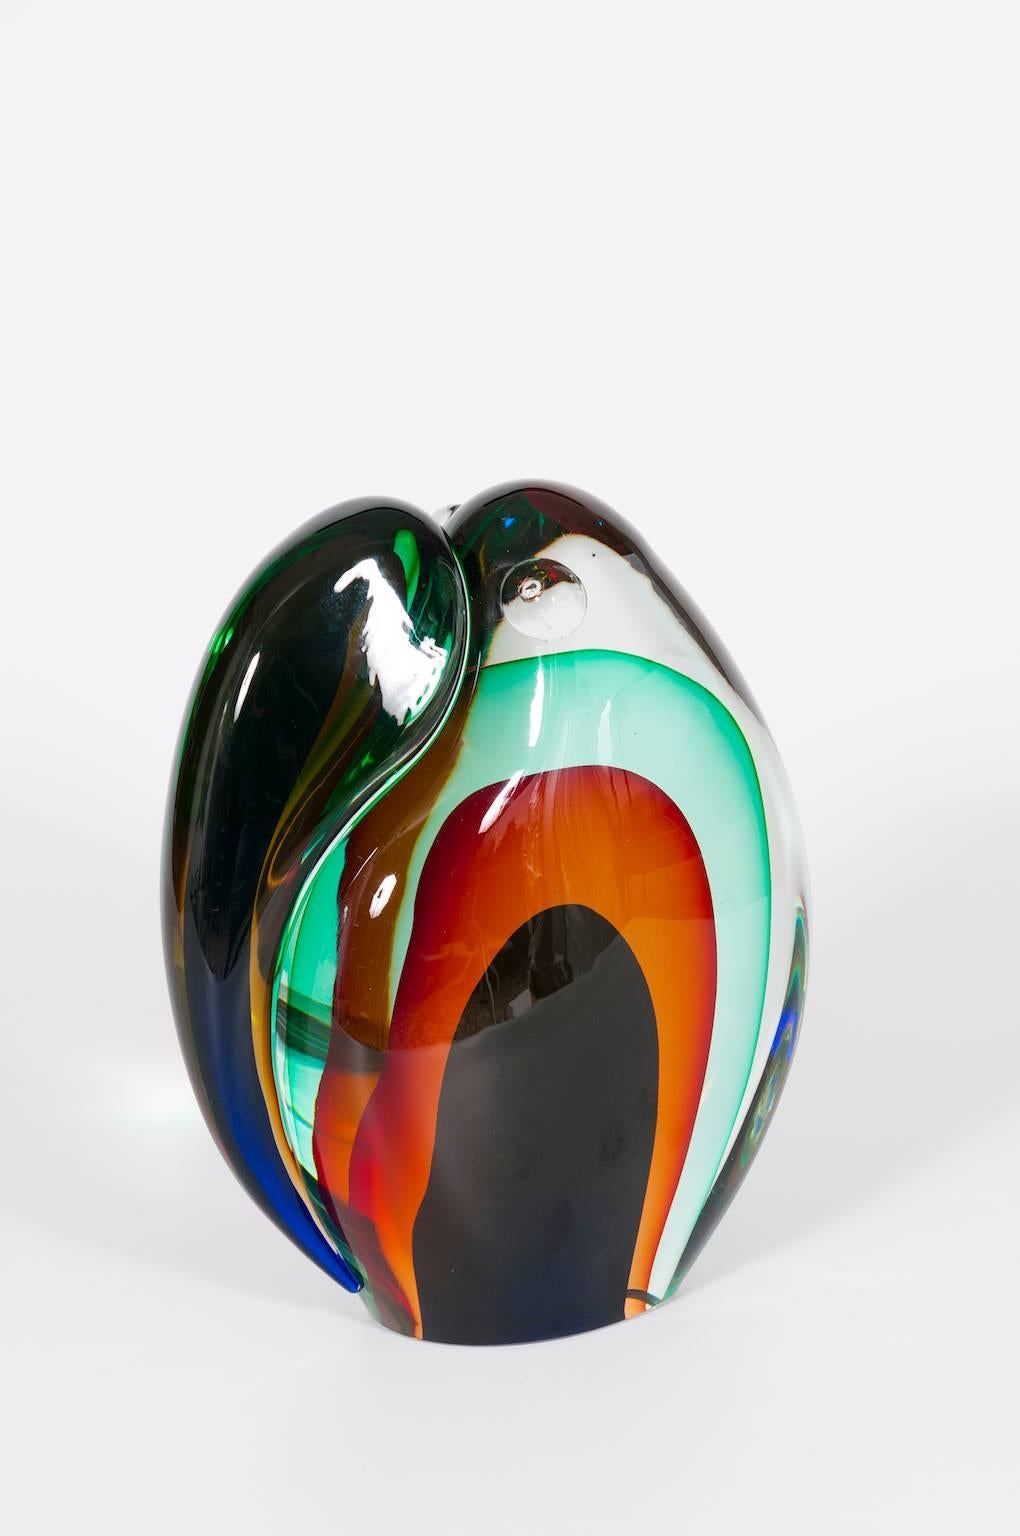 Romano Donà 1990s Multi-Color Murano Glass Toucan Sculpture Venice Italy.
Behold a captivating masterpiece, a testament to the enchanting artistry of Murano, Italy. This remarkable toucan sculpture, crafted from multi-color Murano glass in the 1990s